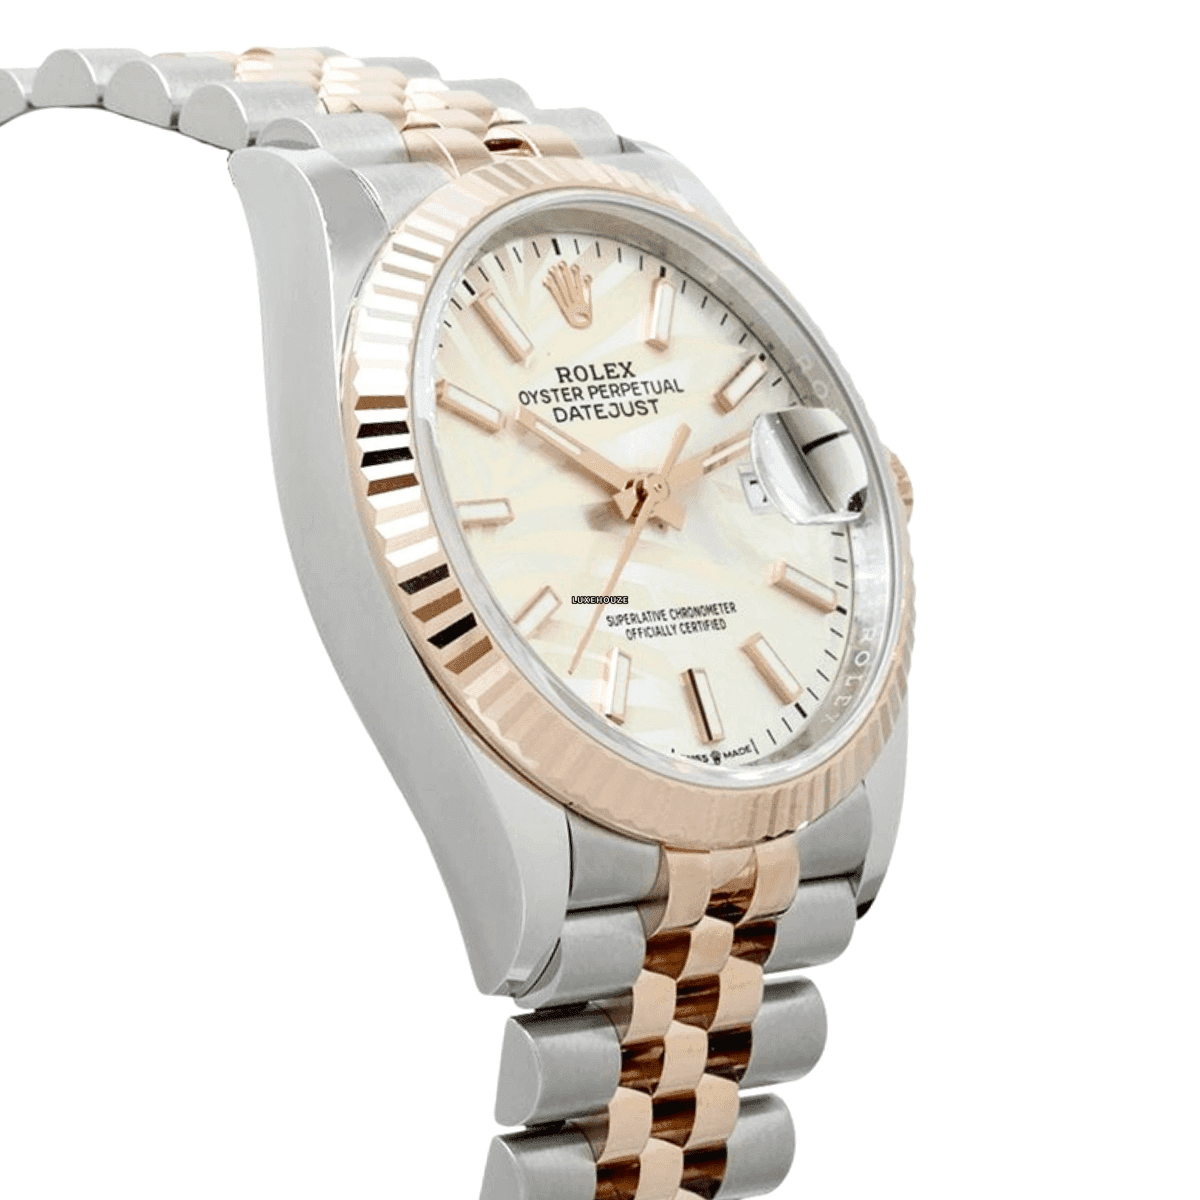 Datejust 36 126231 Silver Palm Jubilee Watches Rolex 